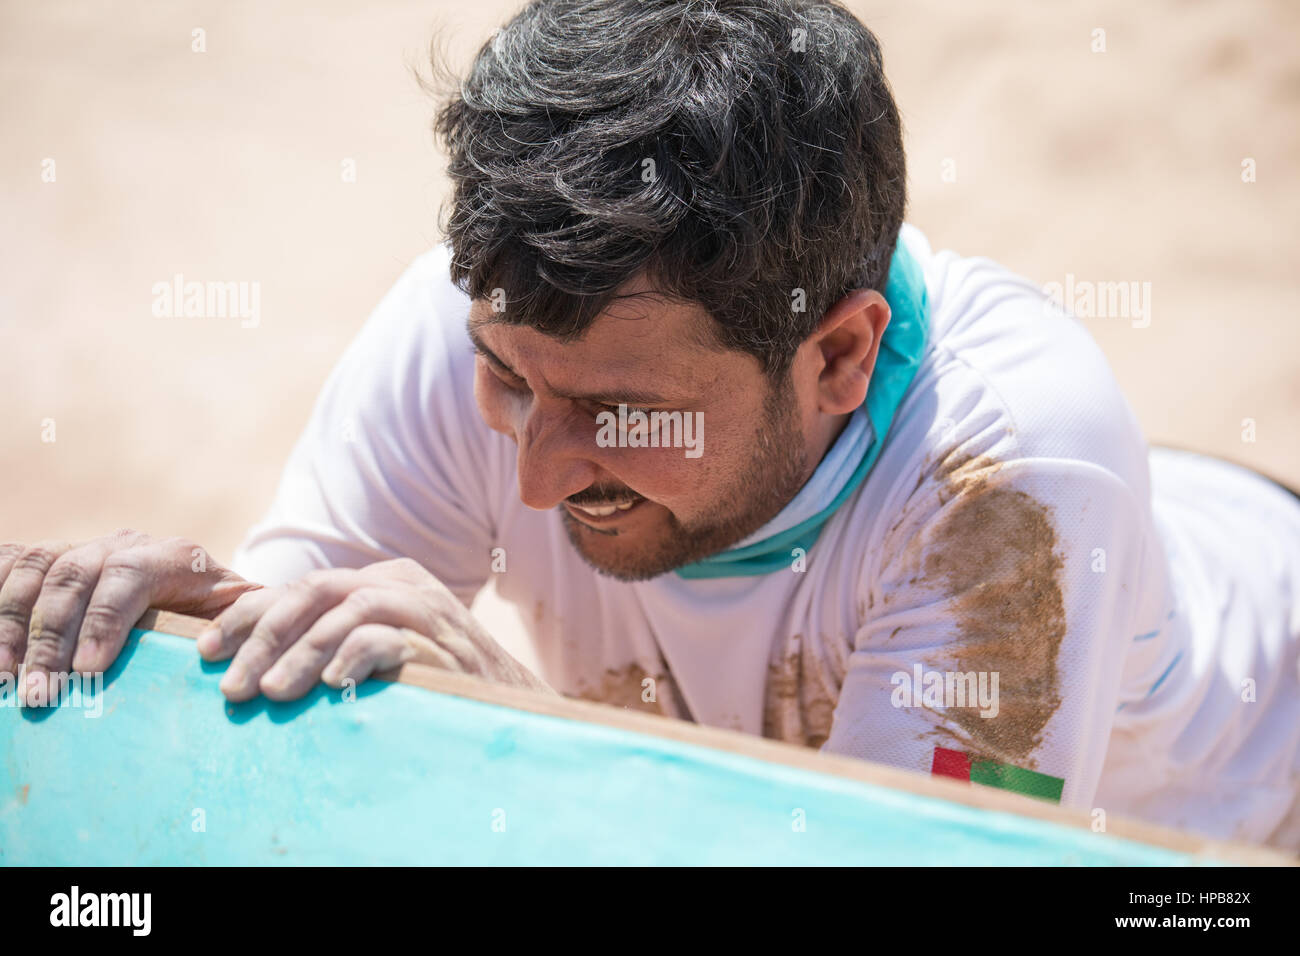 Dubai, UAE - Feb 10th, 2017: Participating in the SandstormDXB race: an off-track obstacle running competition. Stock Photo